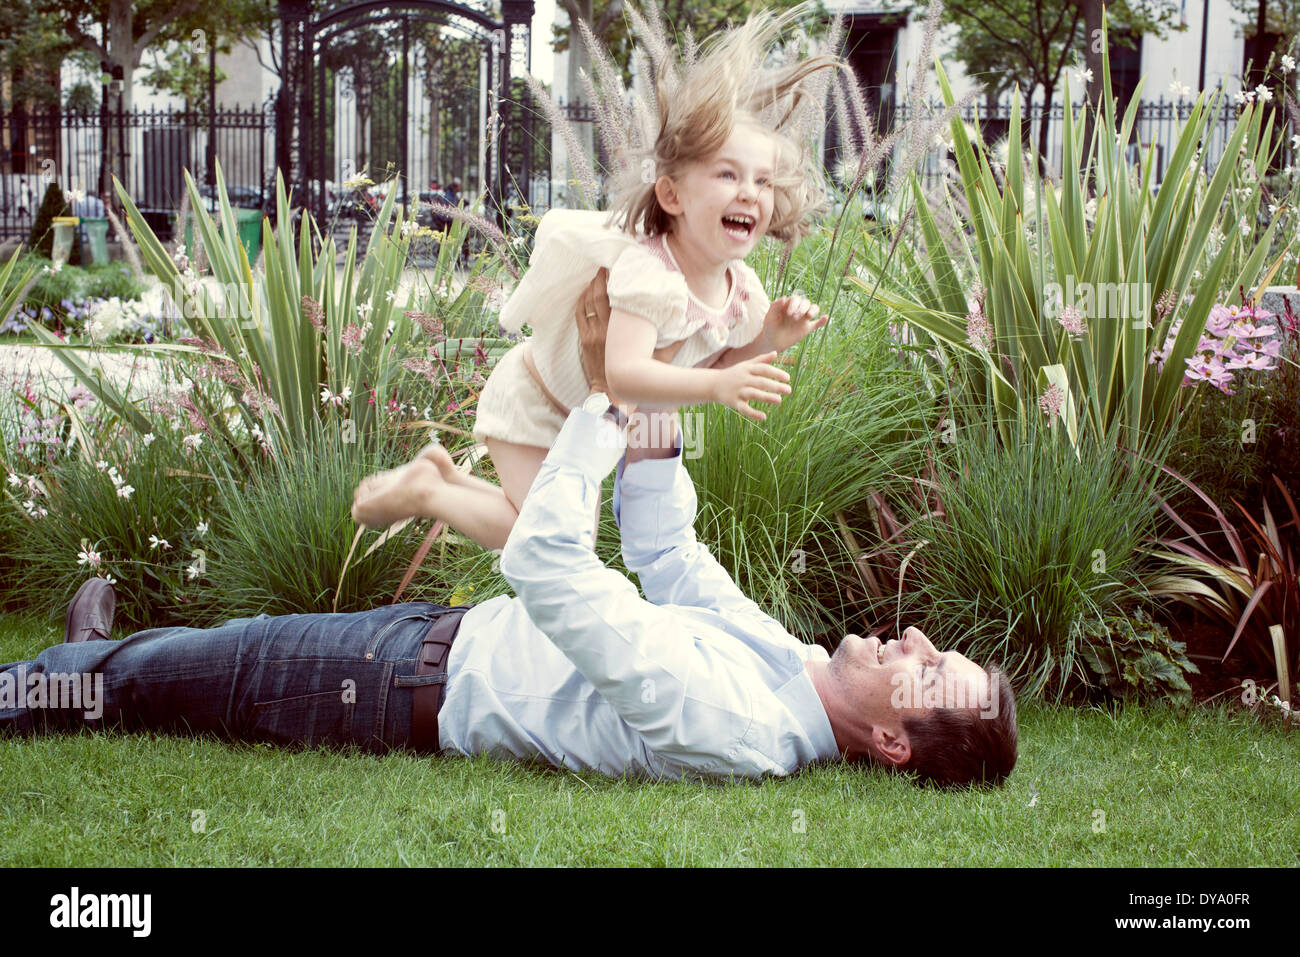 Father lying on grass, playfully lifting young daughter in air Stock Photo